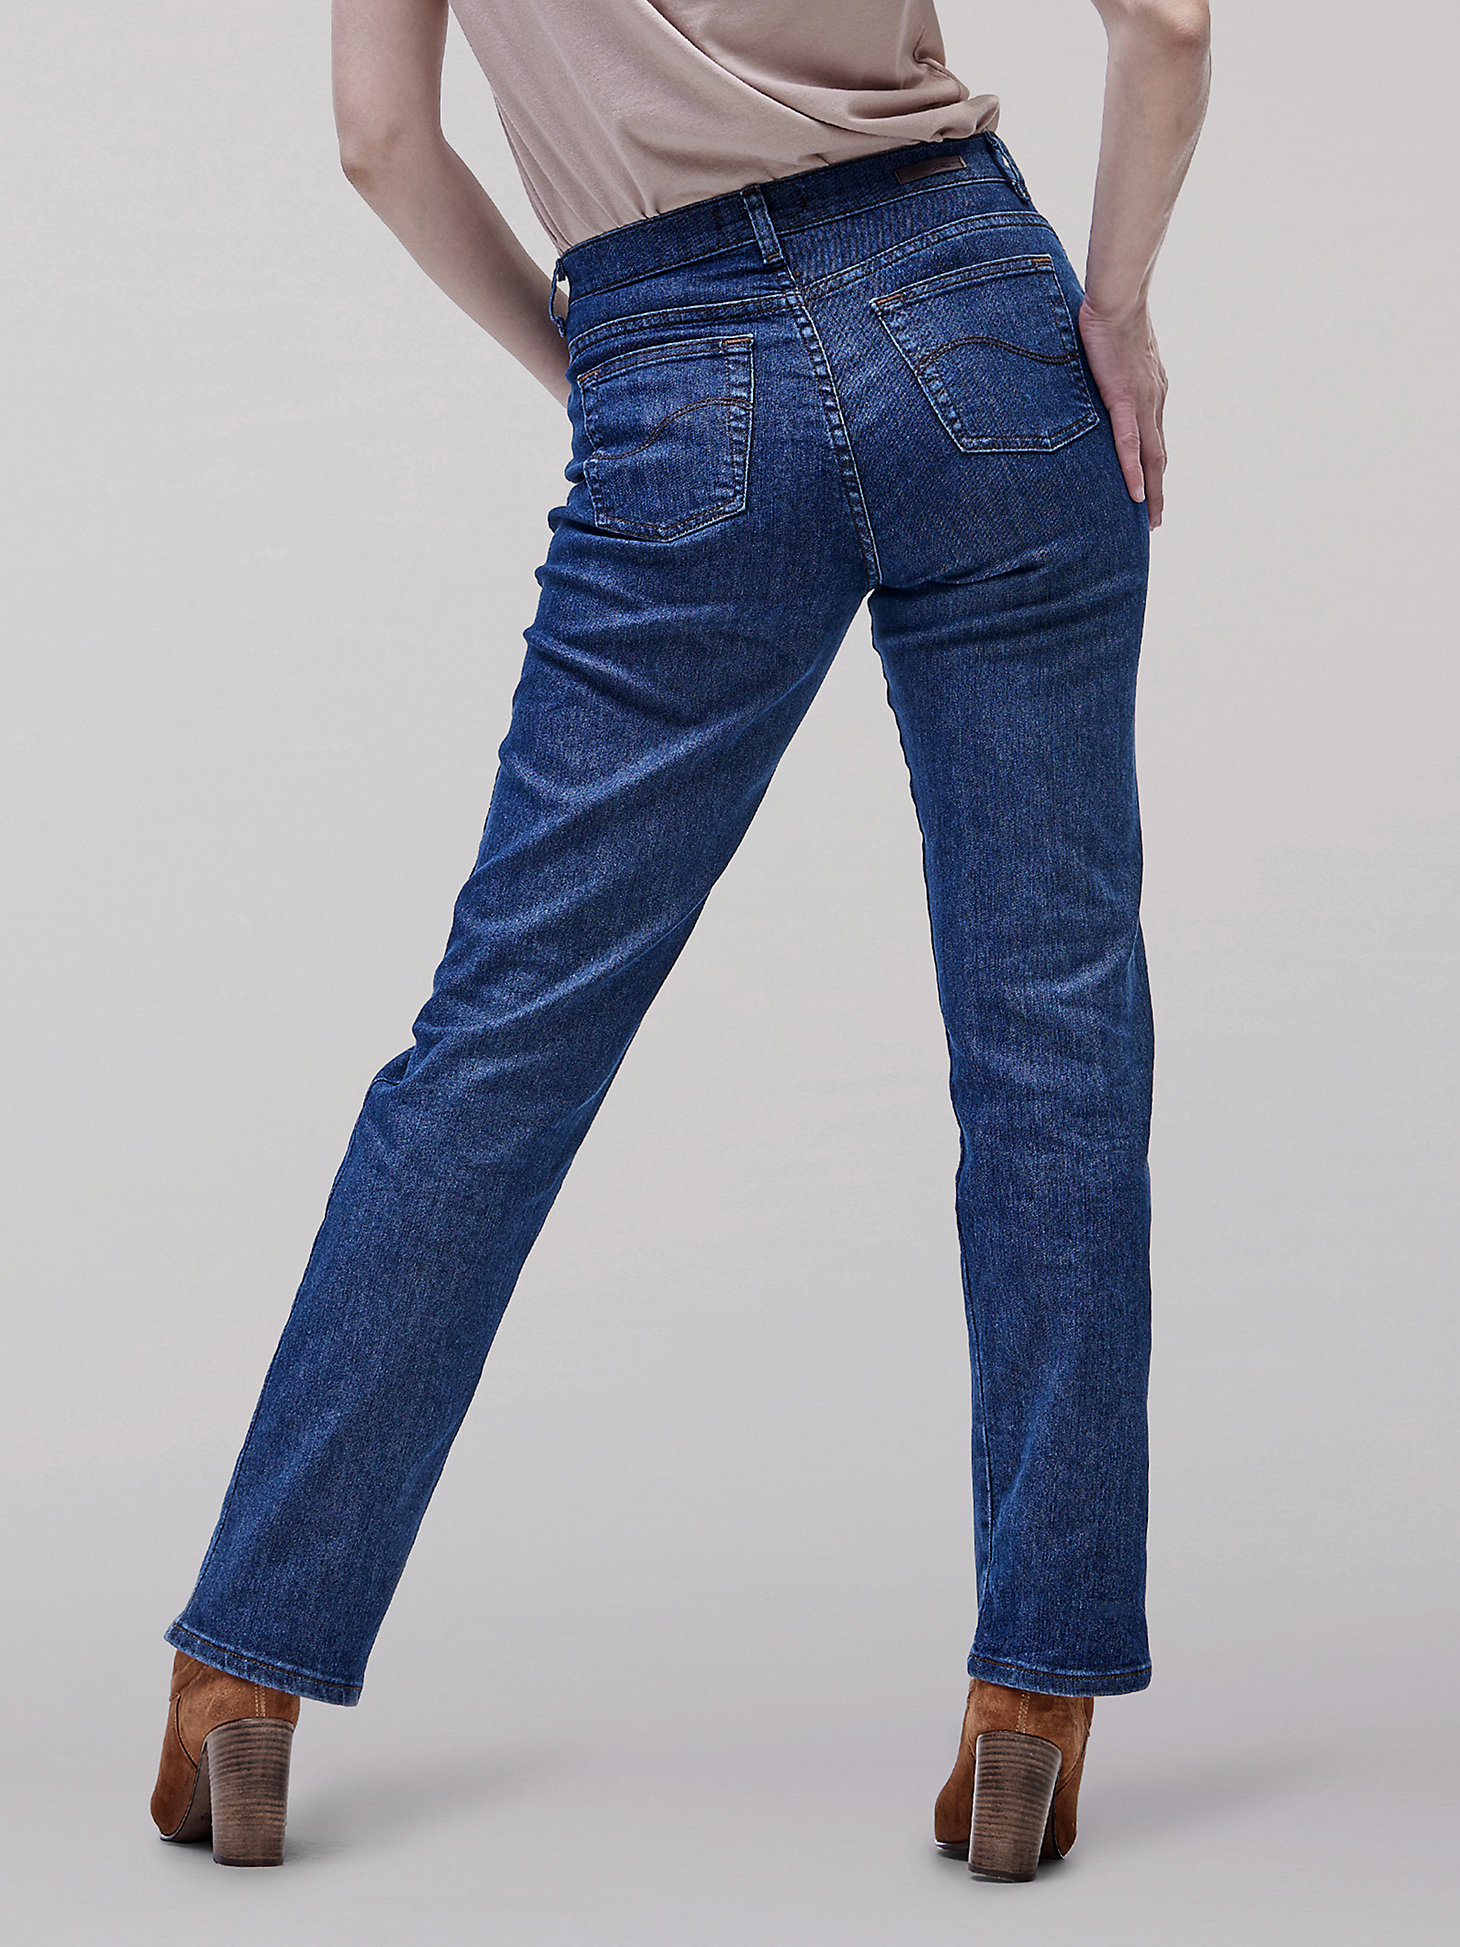 Women’s Original Relaxed Fit Straight Leg Jeans in Premium Rinse alternative view 2